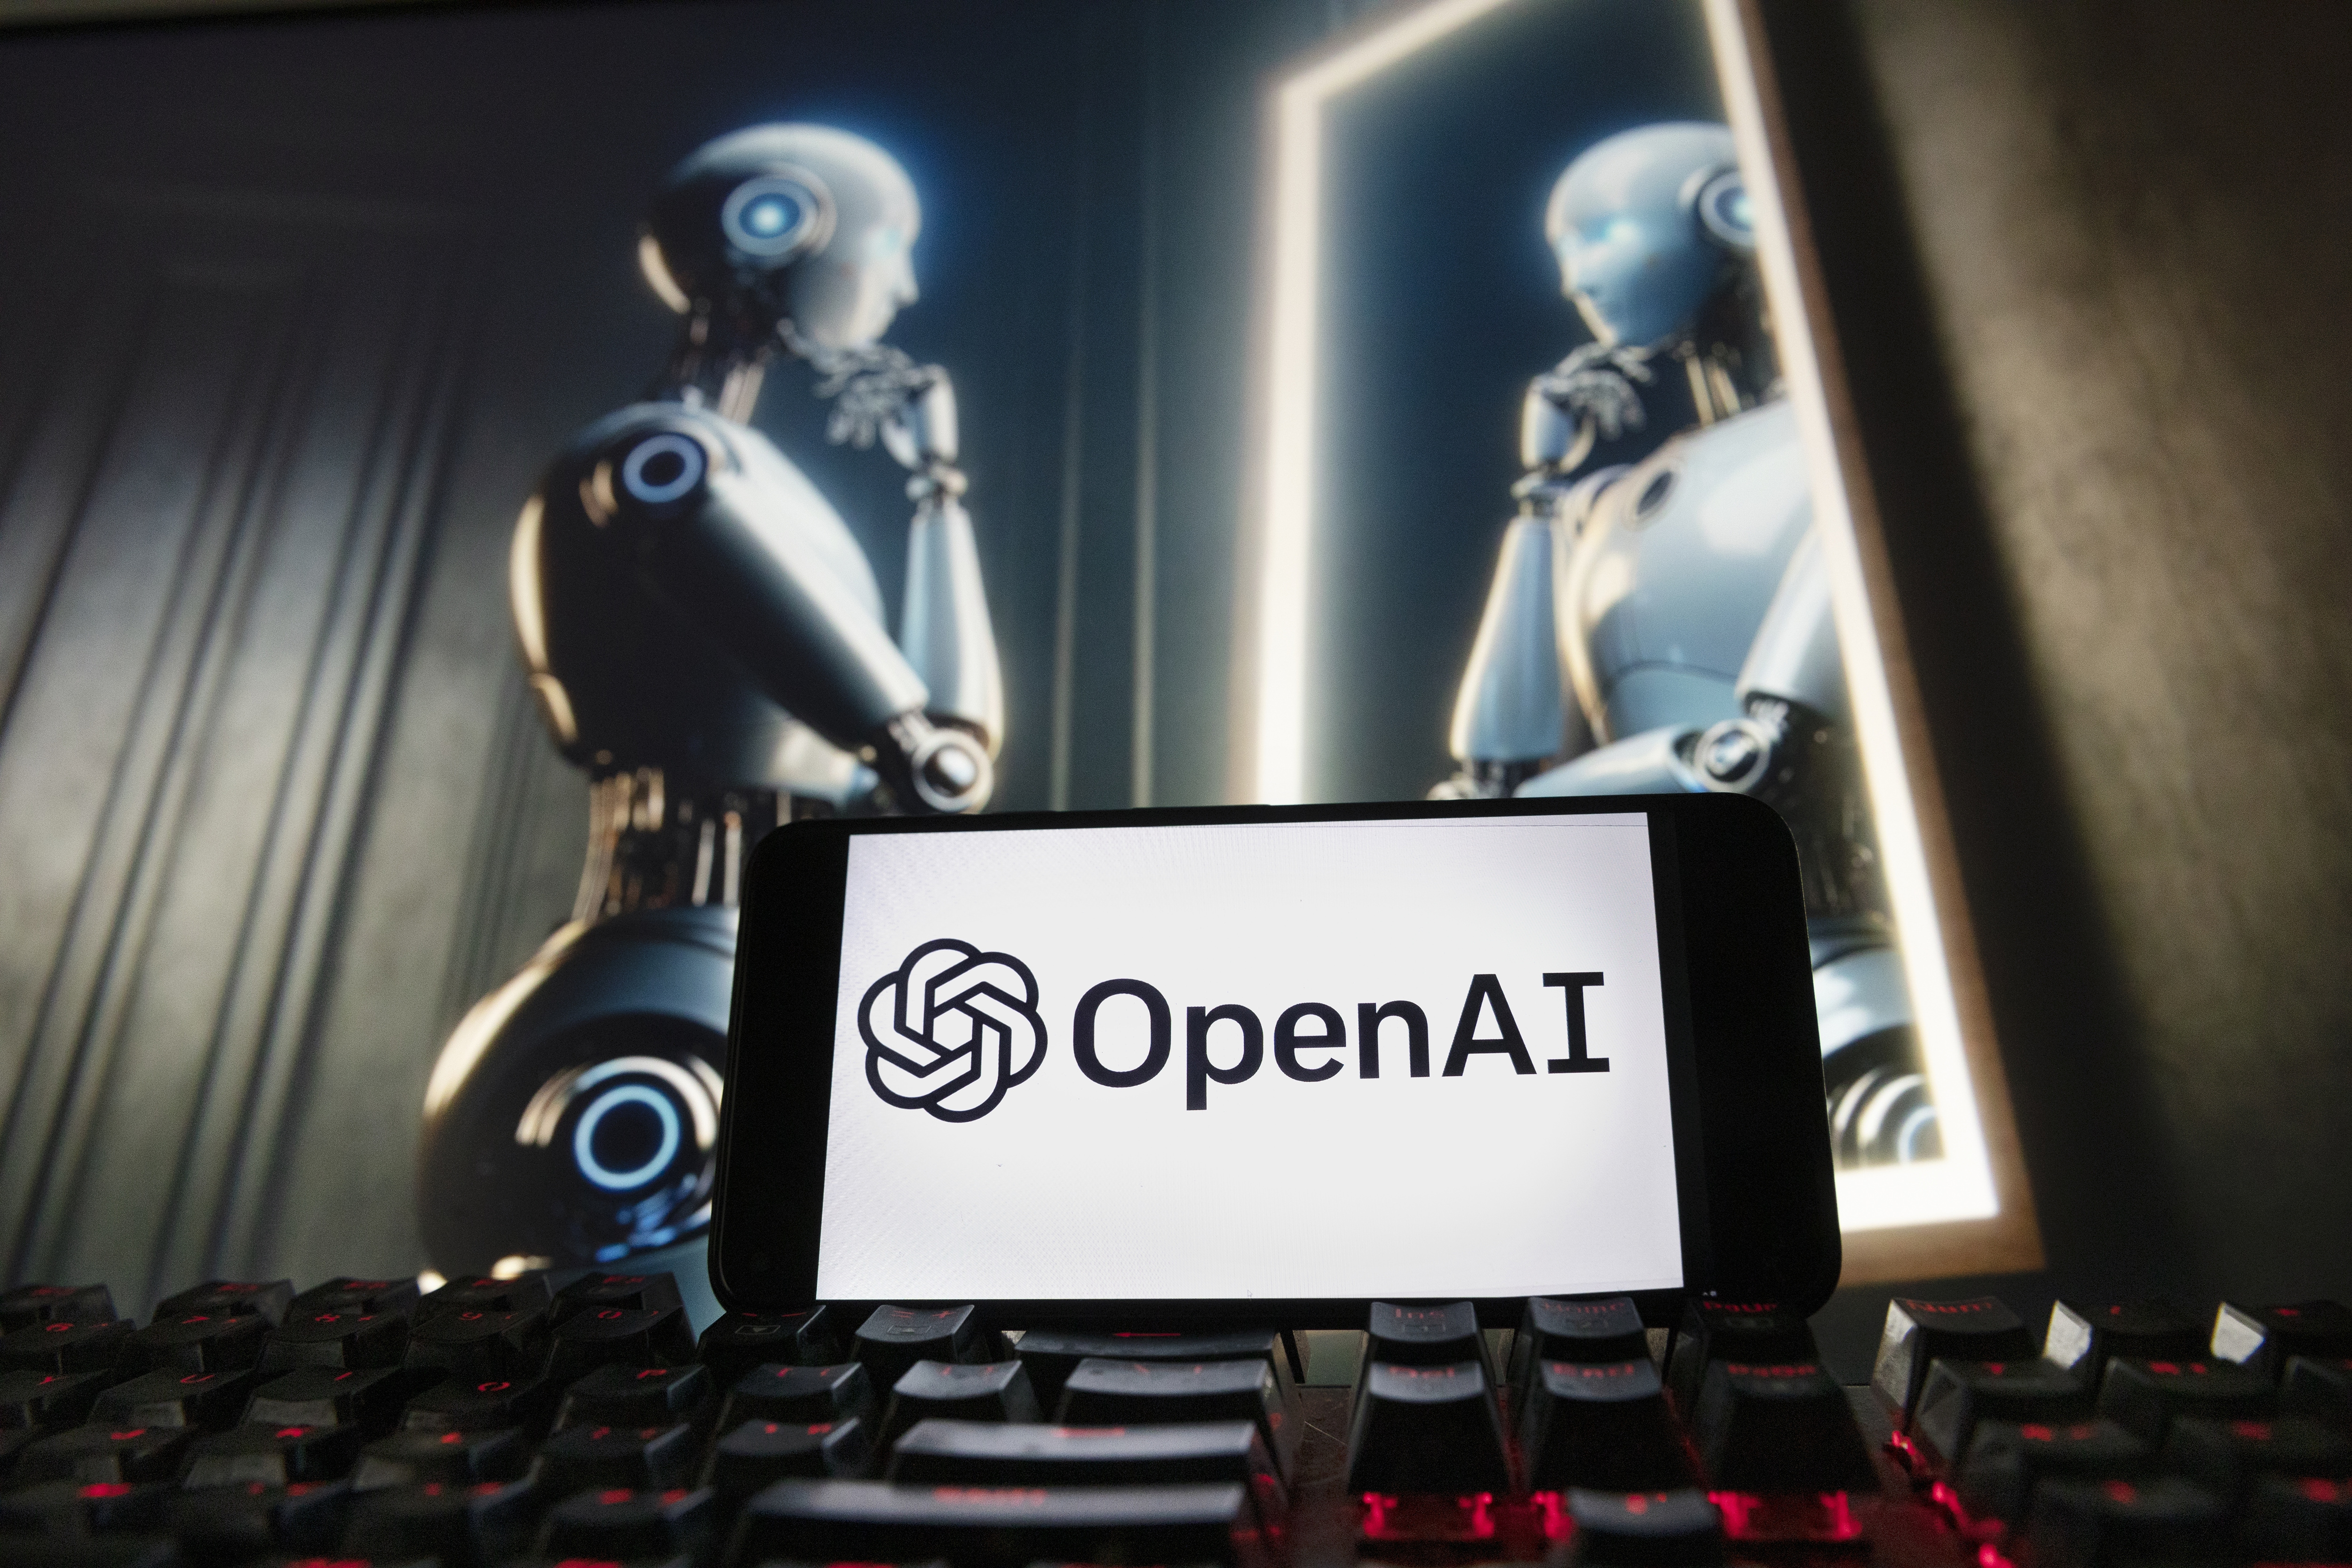 FILE- The OpenAI logo is displayed on a cell phone with an image on a computer monitor generated by ChatGPT's Dall-E text-to-image model, Dec. 8, 2023, in Boston. The European Union is escalating its scrutiny of the artificial intelligence industry, including taking a fresh look into Microsoft’s multibillion-dollar partnership with OpenAI. The bloc started reviewing the multibillion-dollar deal last year to see whether it broke EU merger rules but dropped it after concluding Microsoft hadn’t gained control of OpenAI. (AP Photo/Michael Dwyer, File)